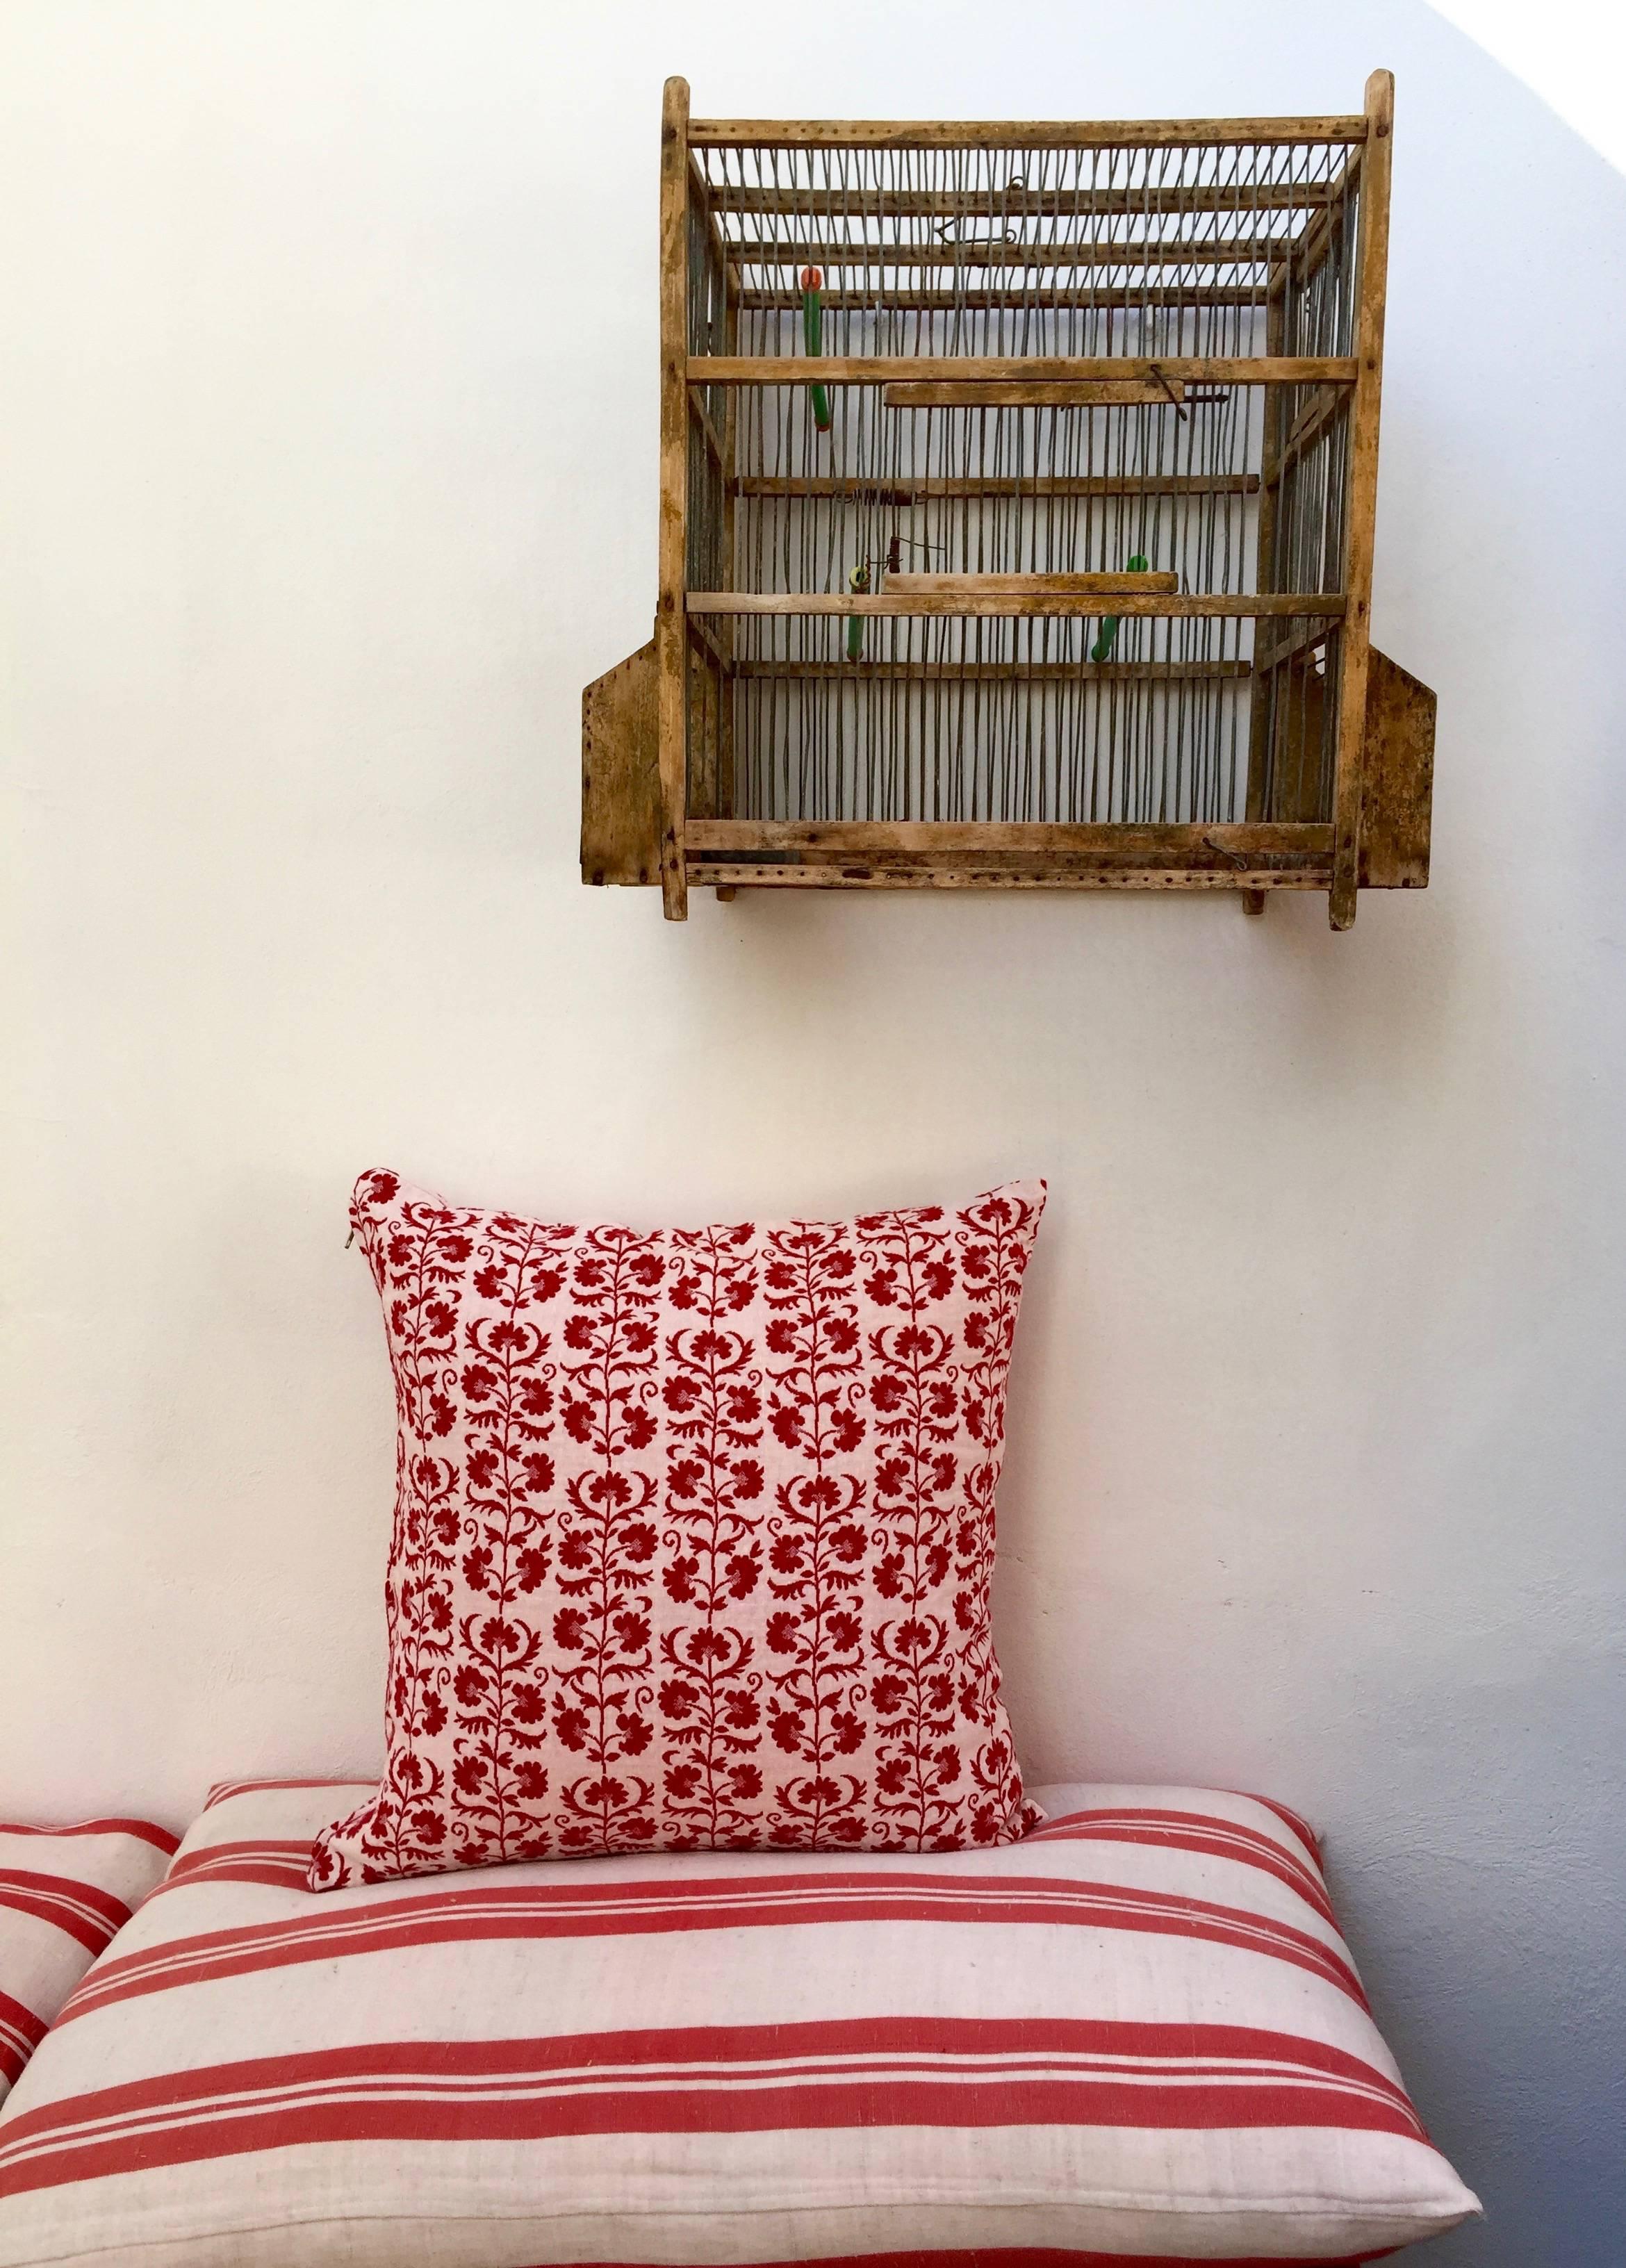 Embroidered cushion.
This cushion cover is made with jacquard pure linen. The floral motif in red and white is influenced by traditional Suzani patterns. “Suzani” refers to the traditional needlework of Uzbekistan.
It comes with polyester pillow